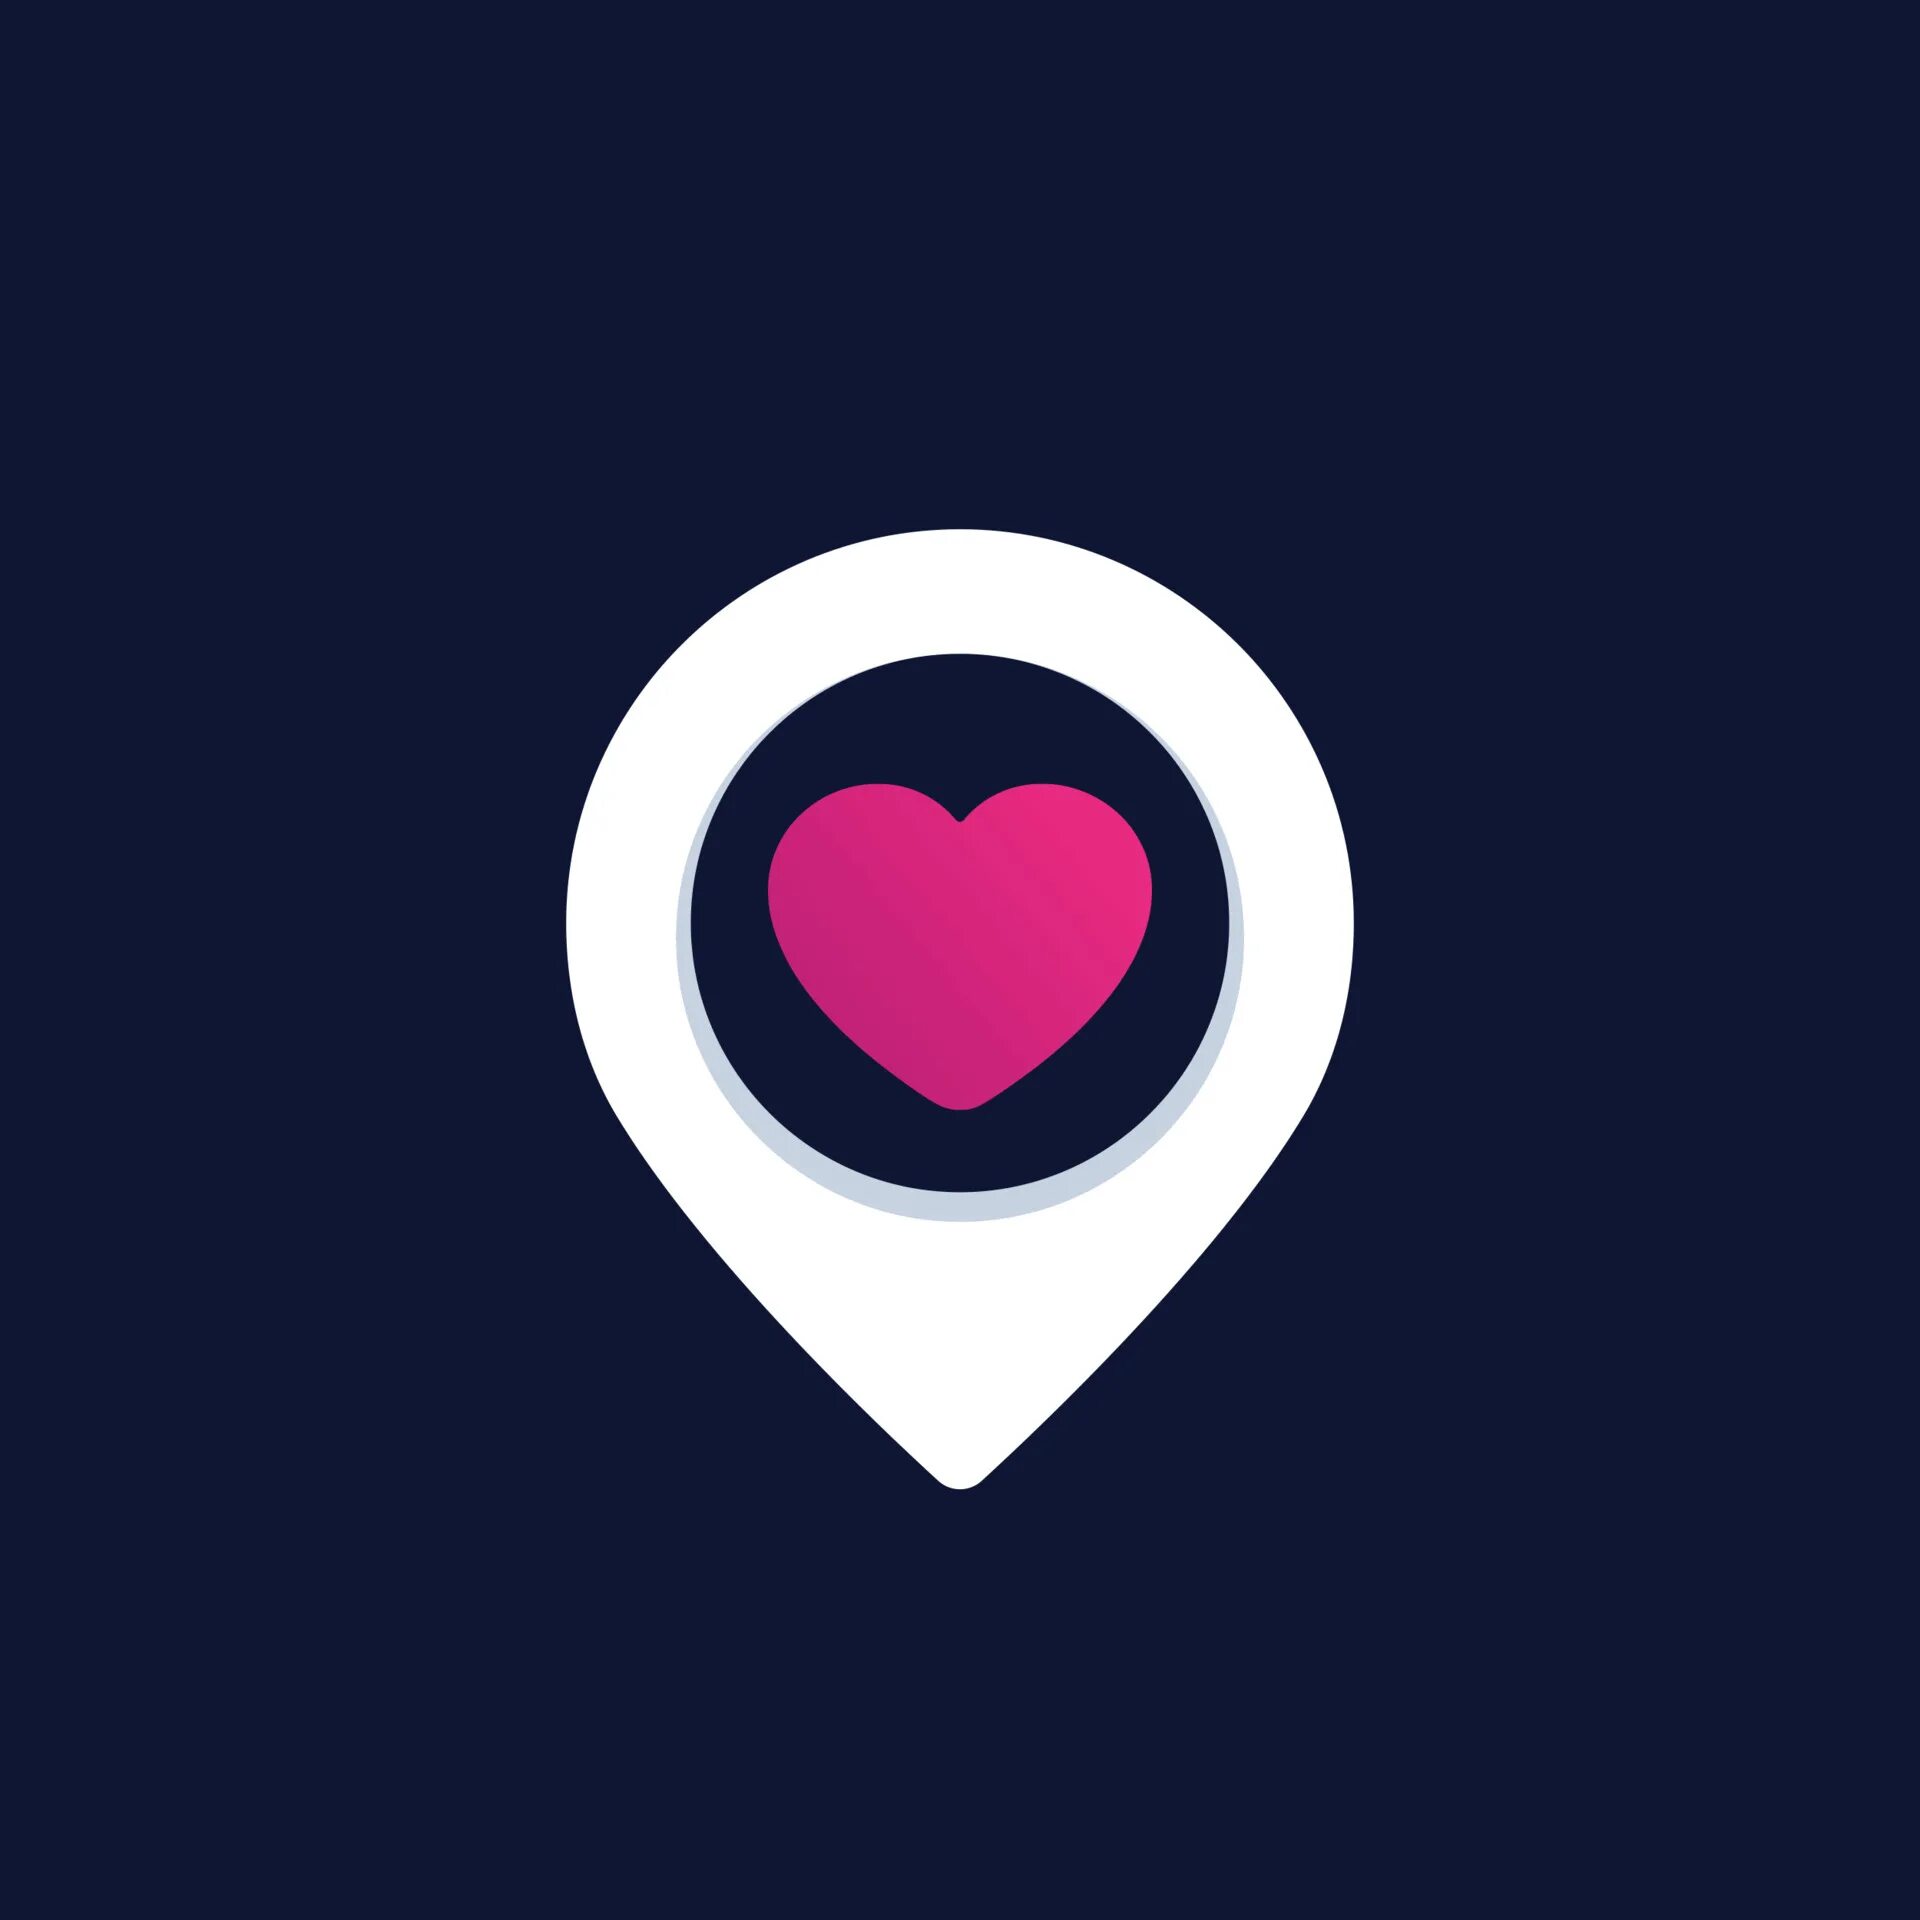 Location date. Dating logo. Meet Singles nearby. Online dating - flirt meet Singles nearby.